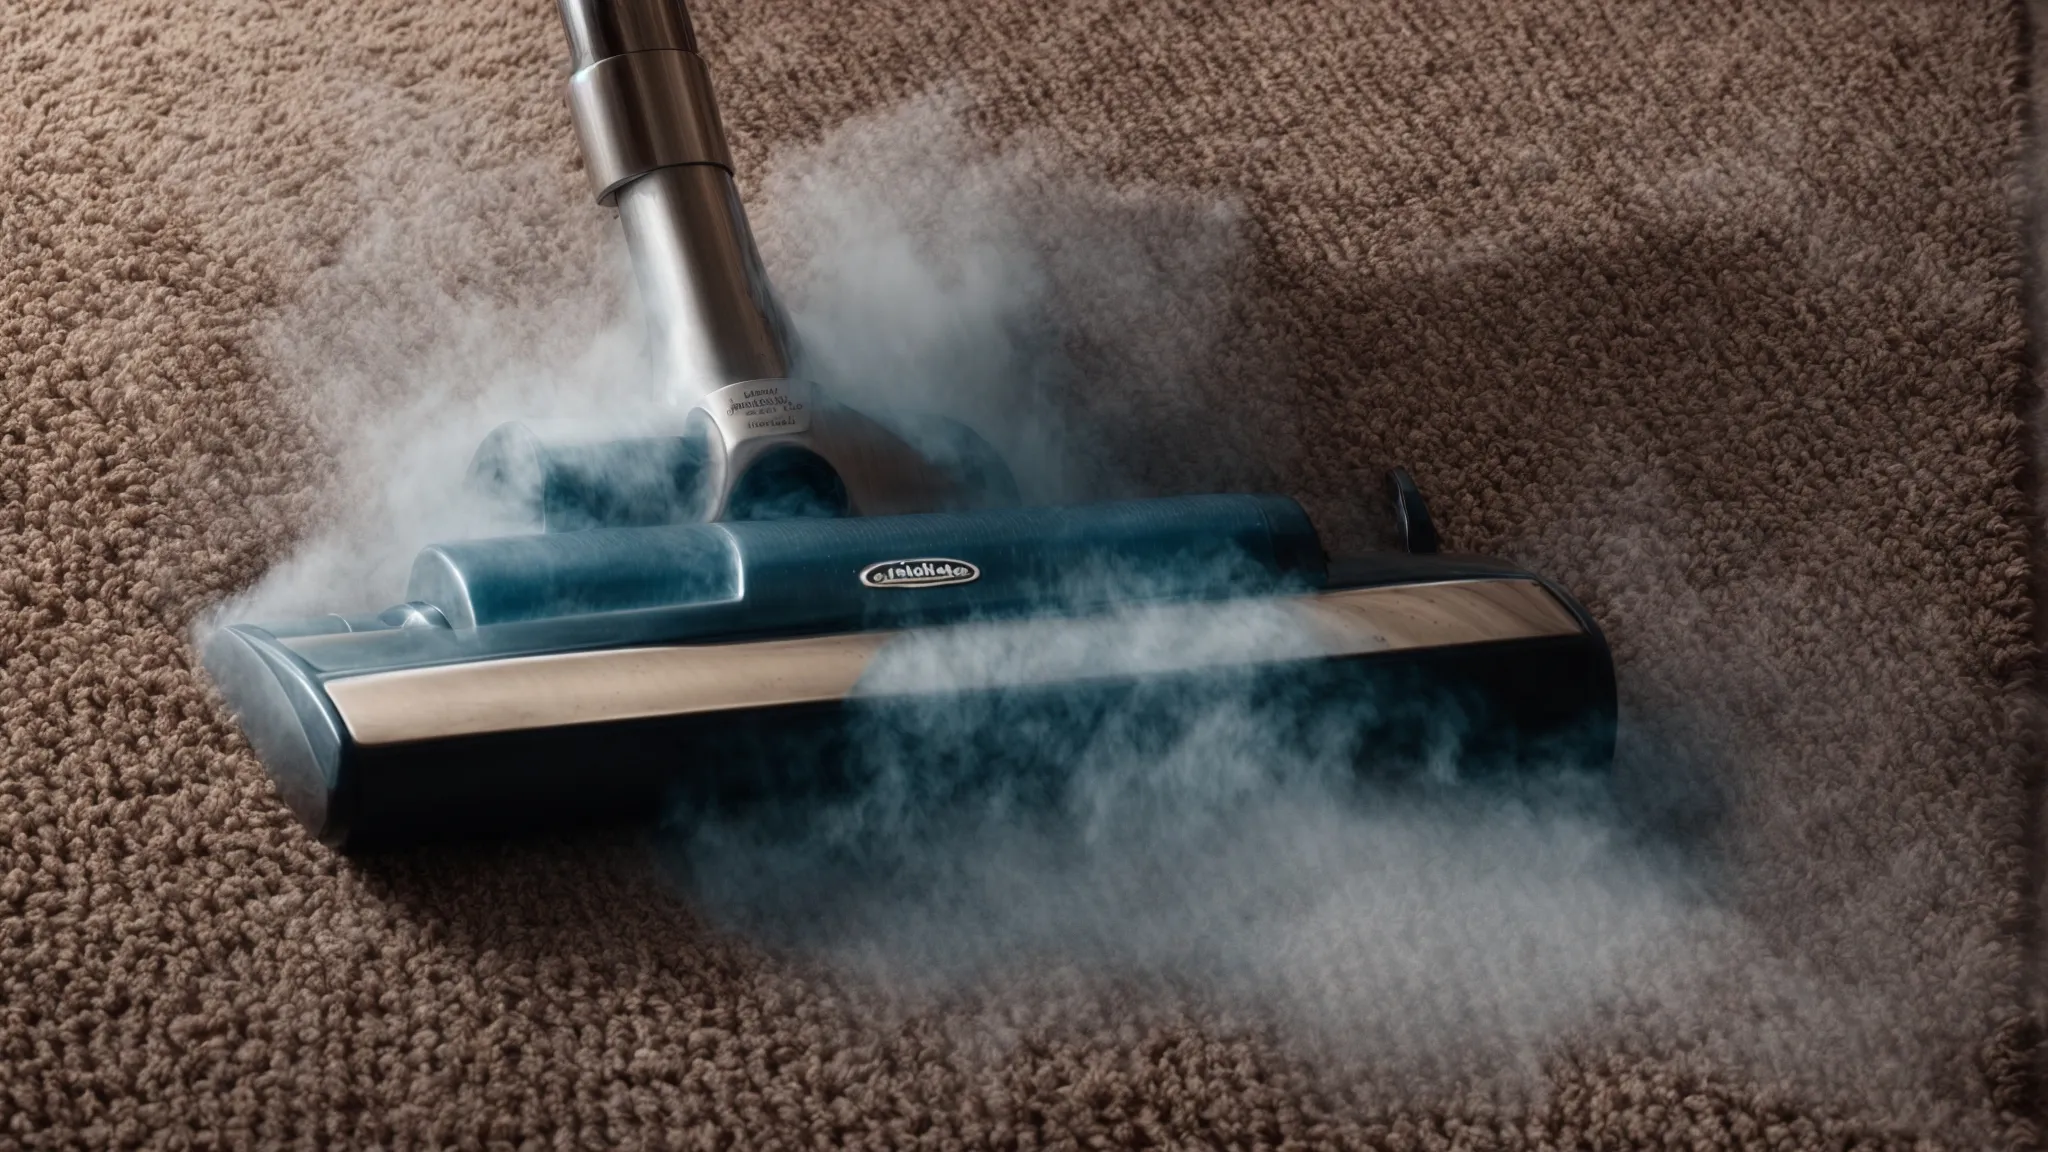 a professional carpet cleaner meticulously steams a rug, symbolizing diligence and attention to detail required in seo practices for the industry.